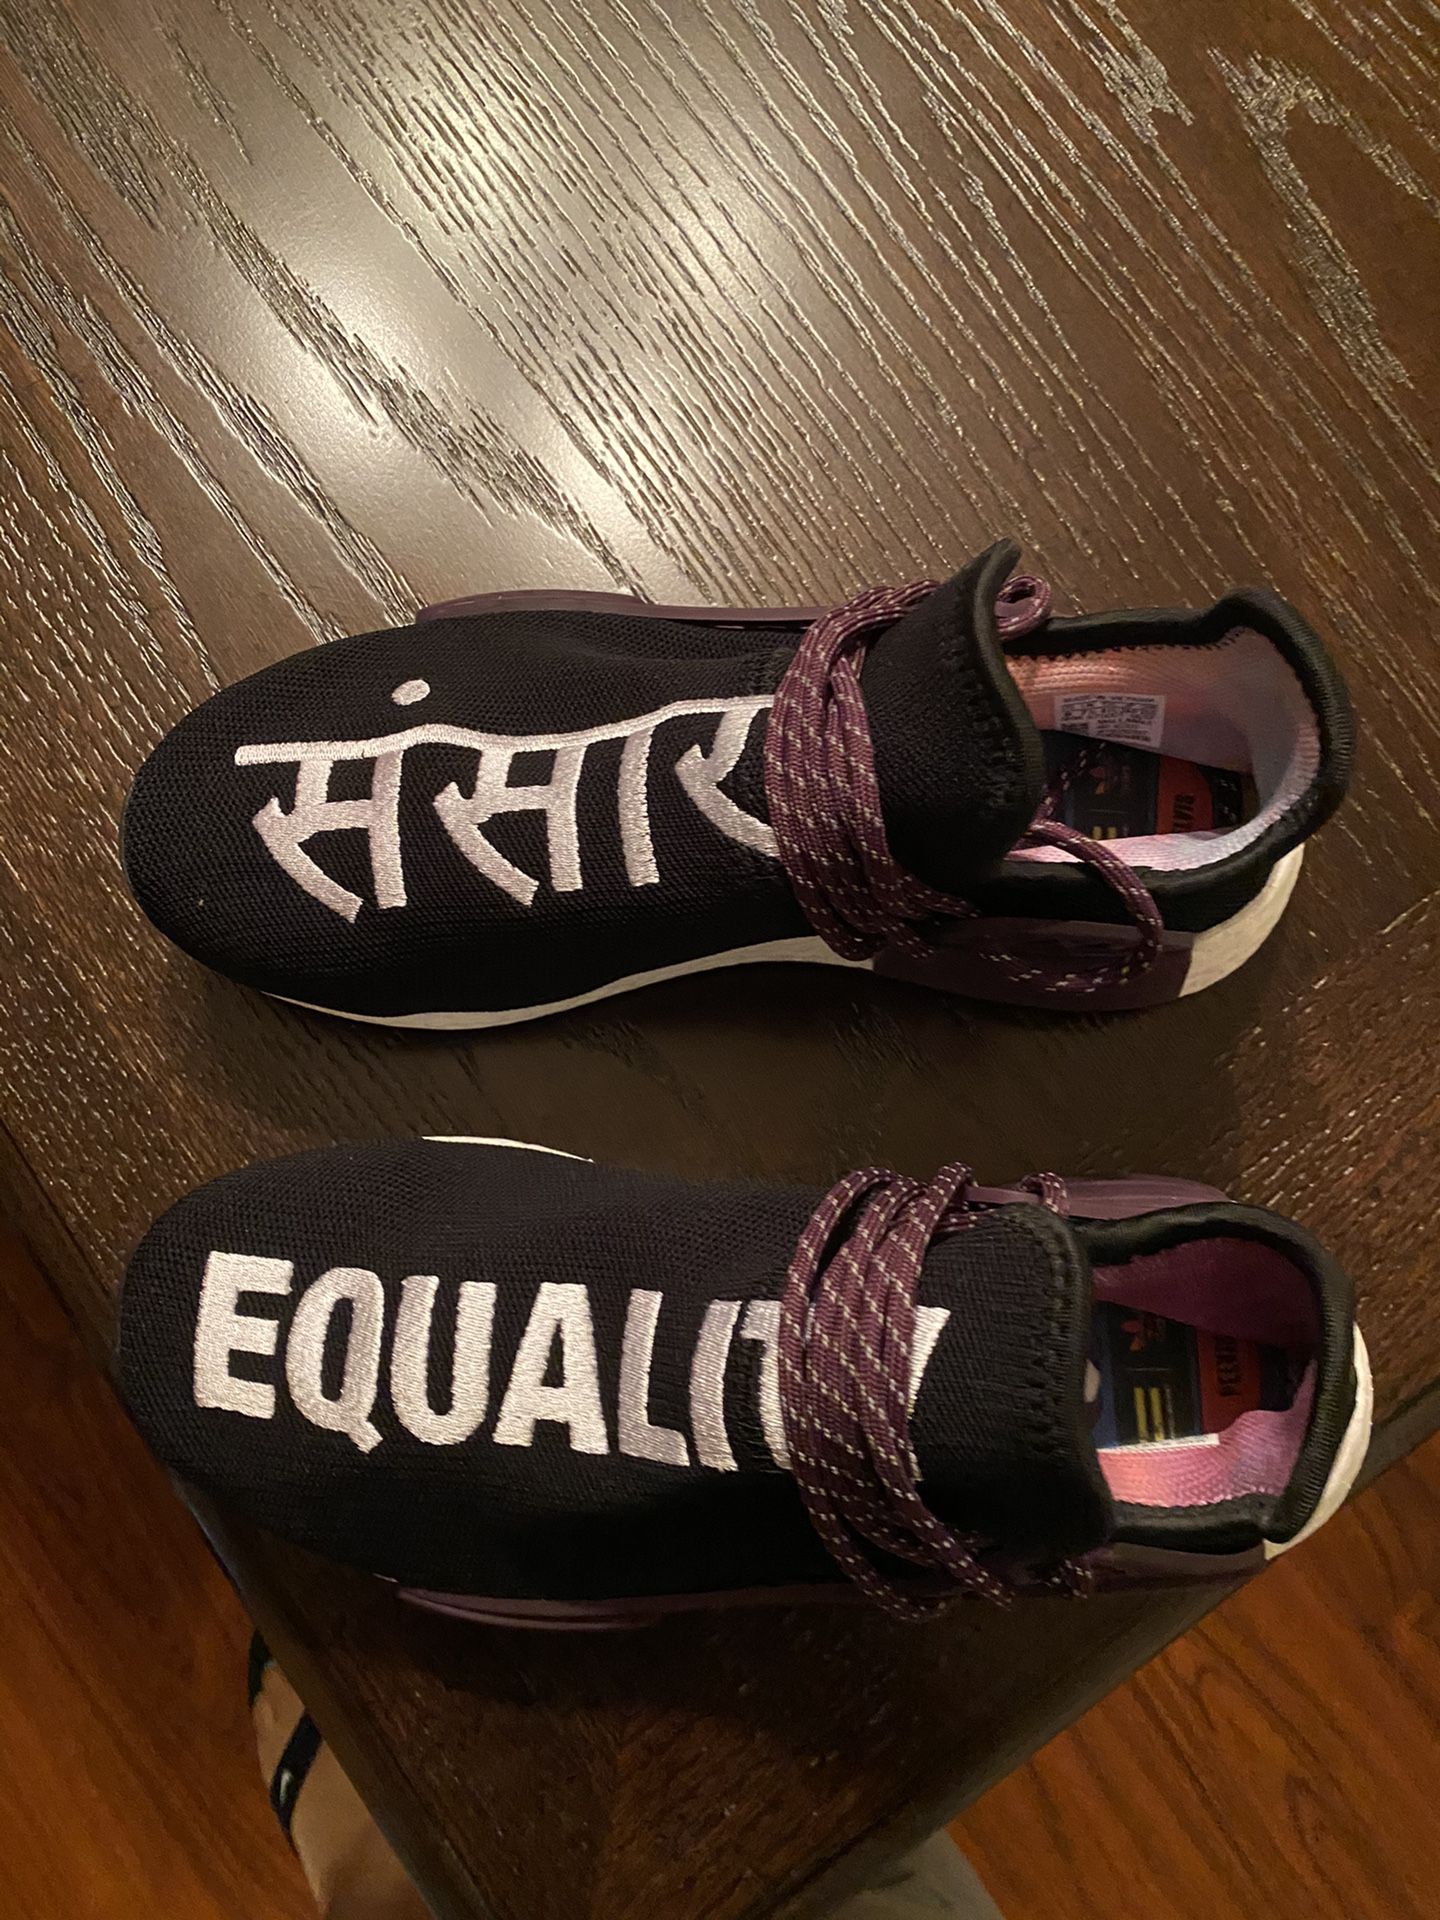 PHARELL NMD HUMAN RACE TRAIL EQUALITY AUTHENTIC